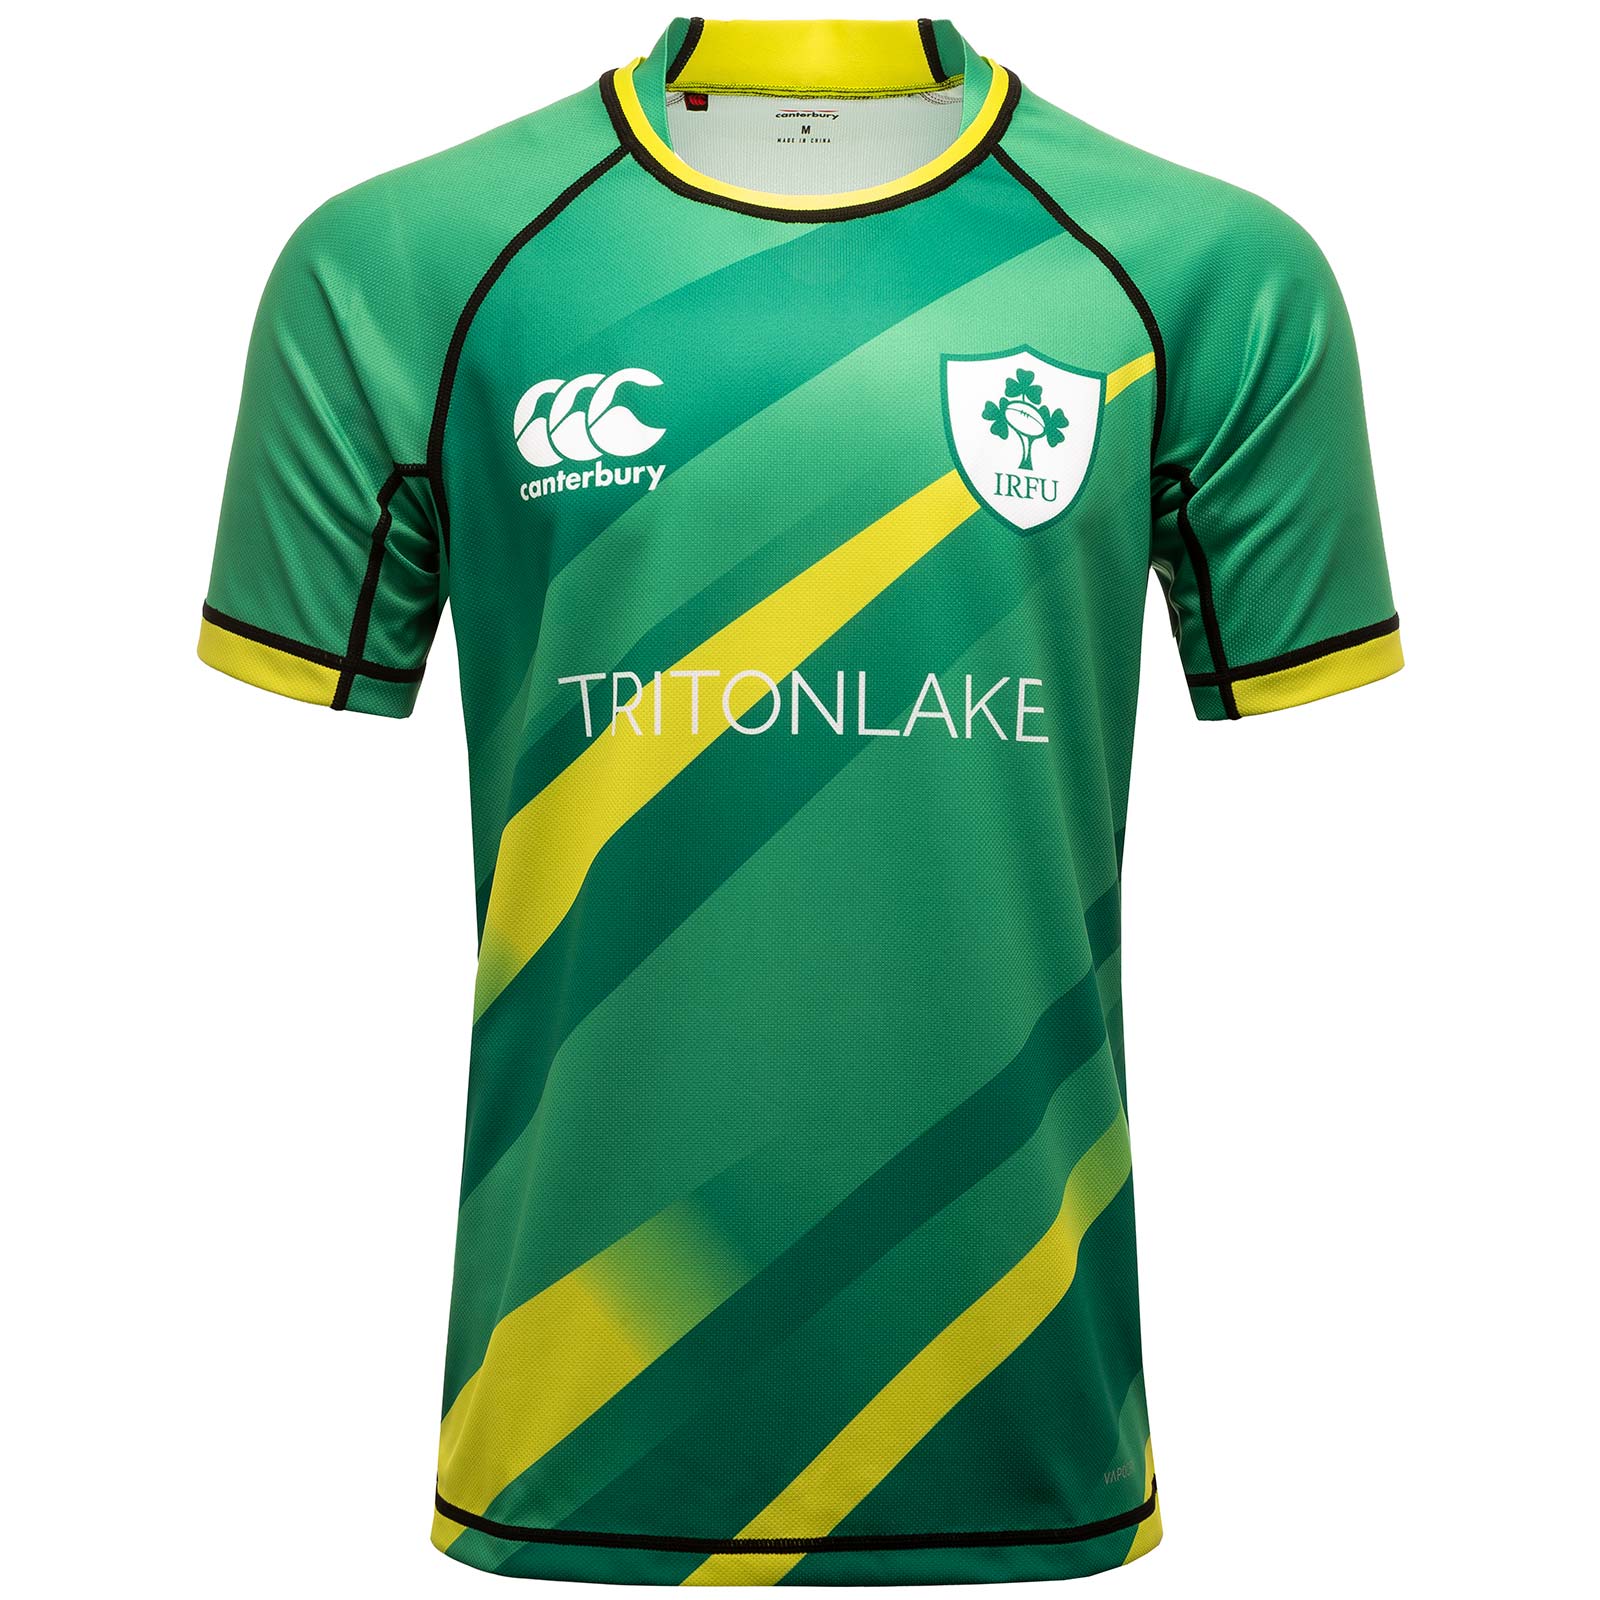 CANTERBURY IRELAND RUGBY 7S 2022/23 PRO JERSEY